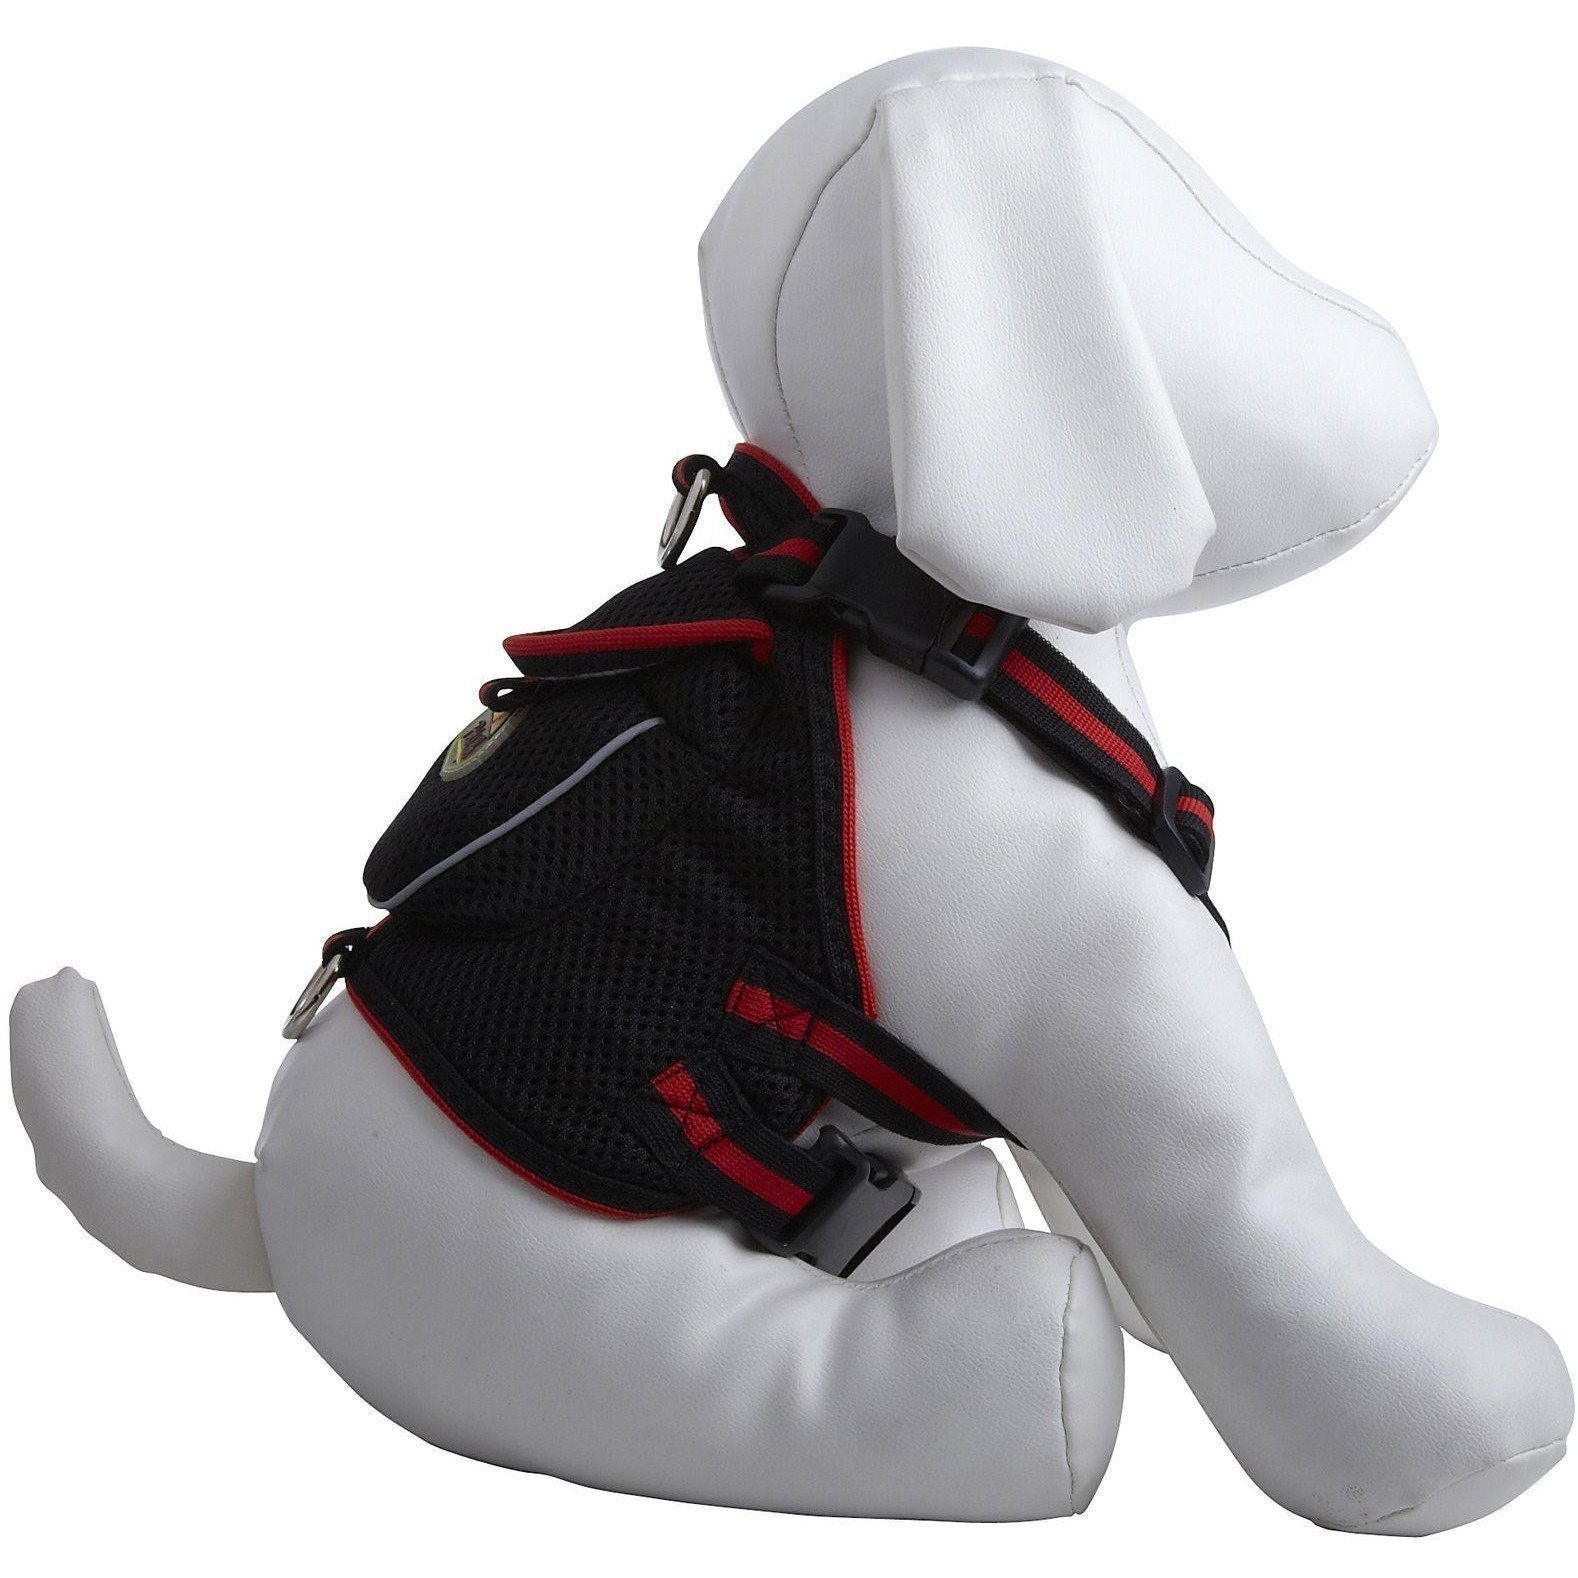 Pet Life ® 'Pocket Bark' Reflective Adjustable Fashion Pet Dog Harness w/ Hook-and-Loop Pouch and Dual Harness Rings Small Black